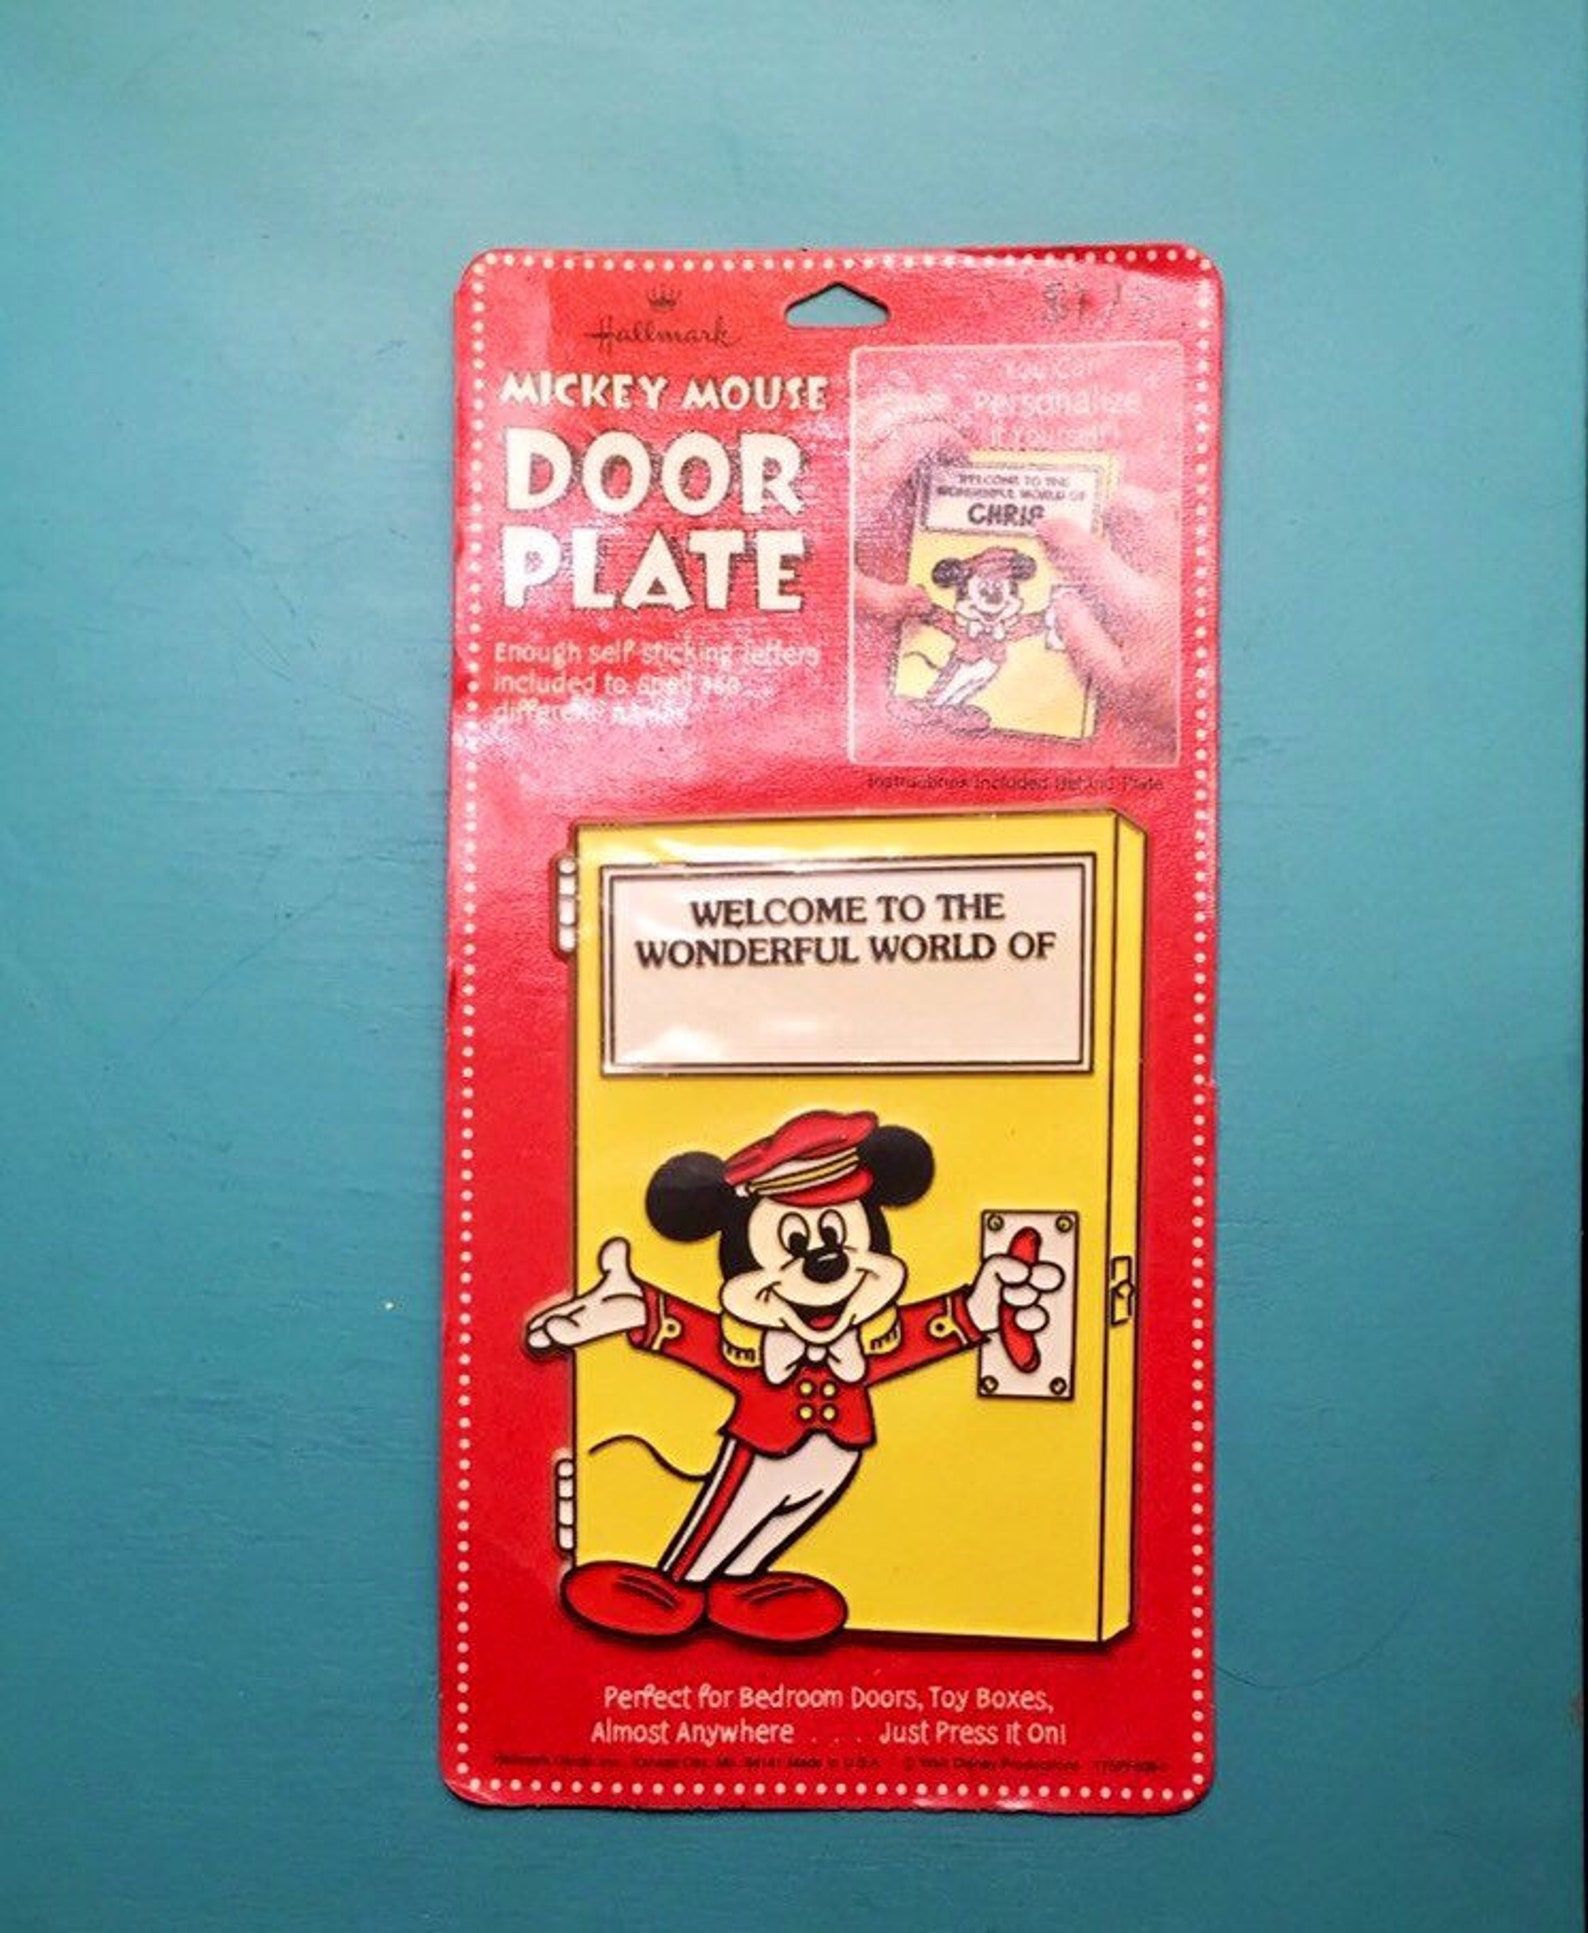 Sealed Mickey Mouse Vintage Door Plate By Hallmark Personalized Collectible Disney Home Decor